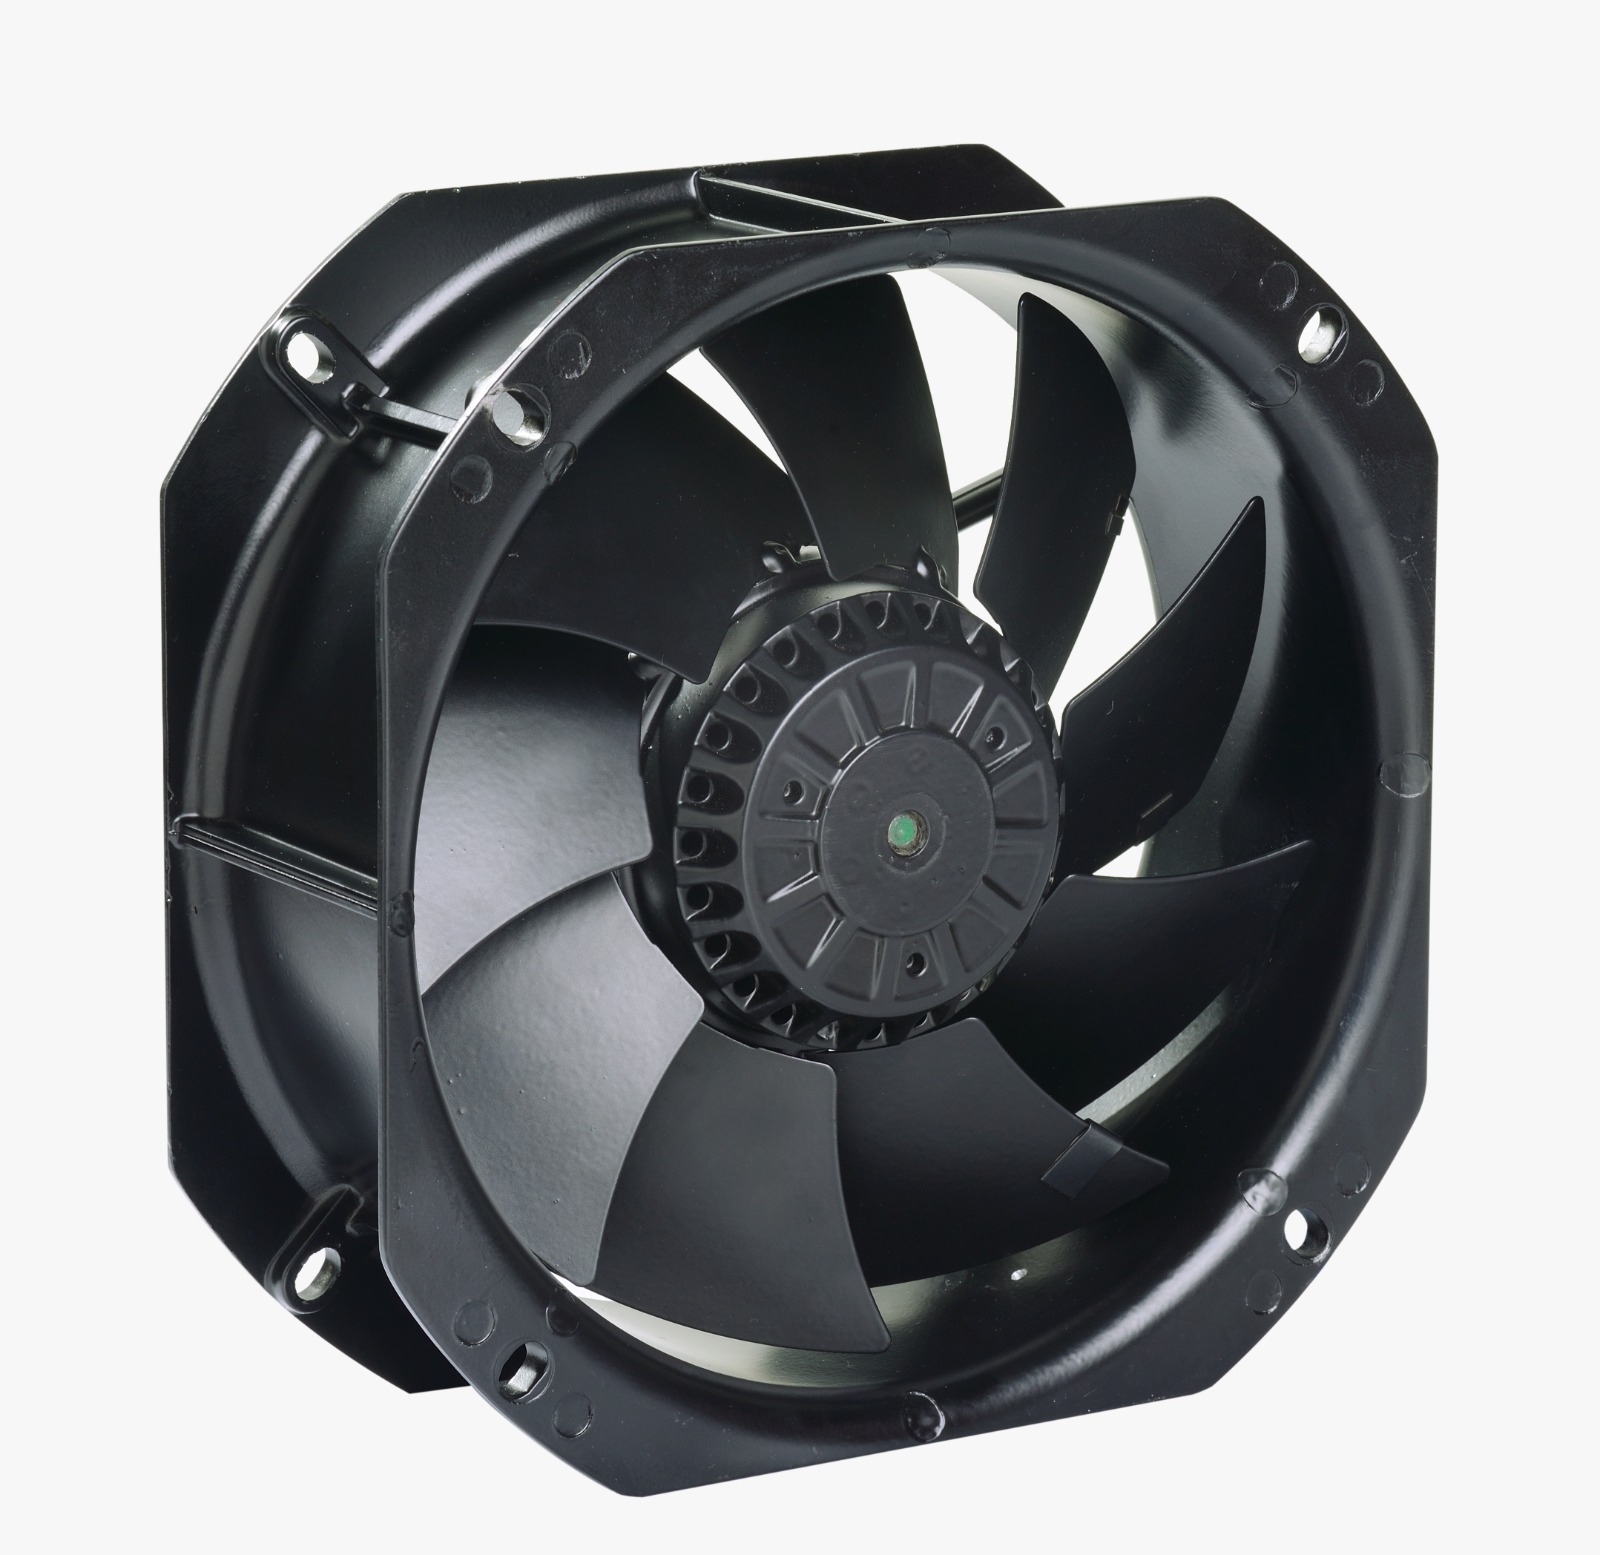 Compact all metal fans